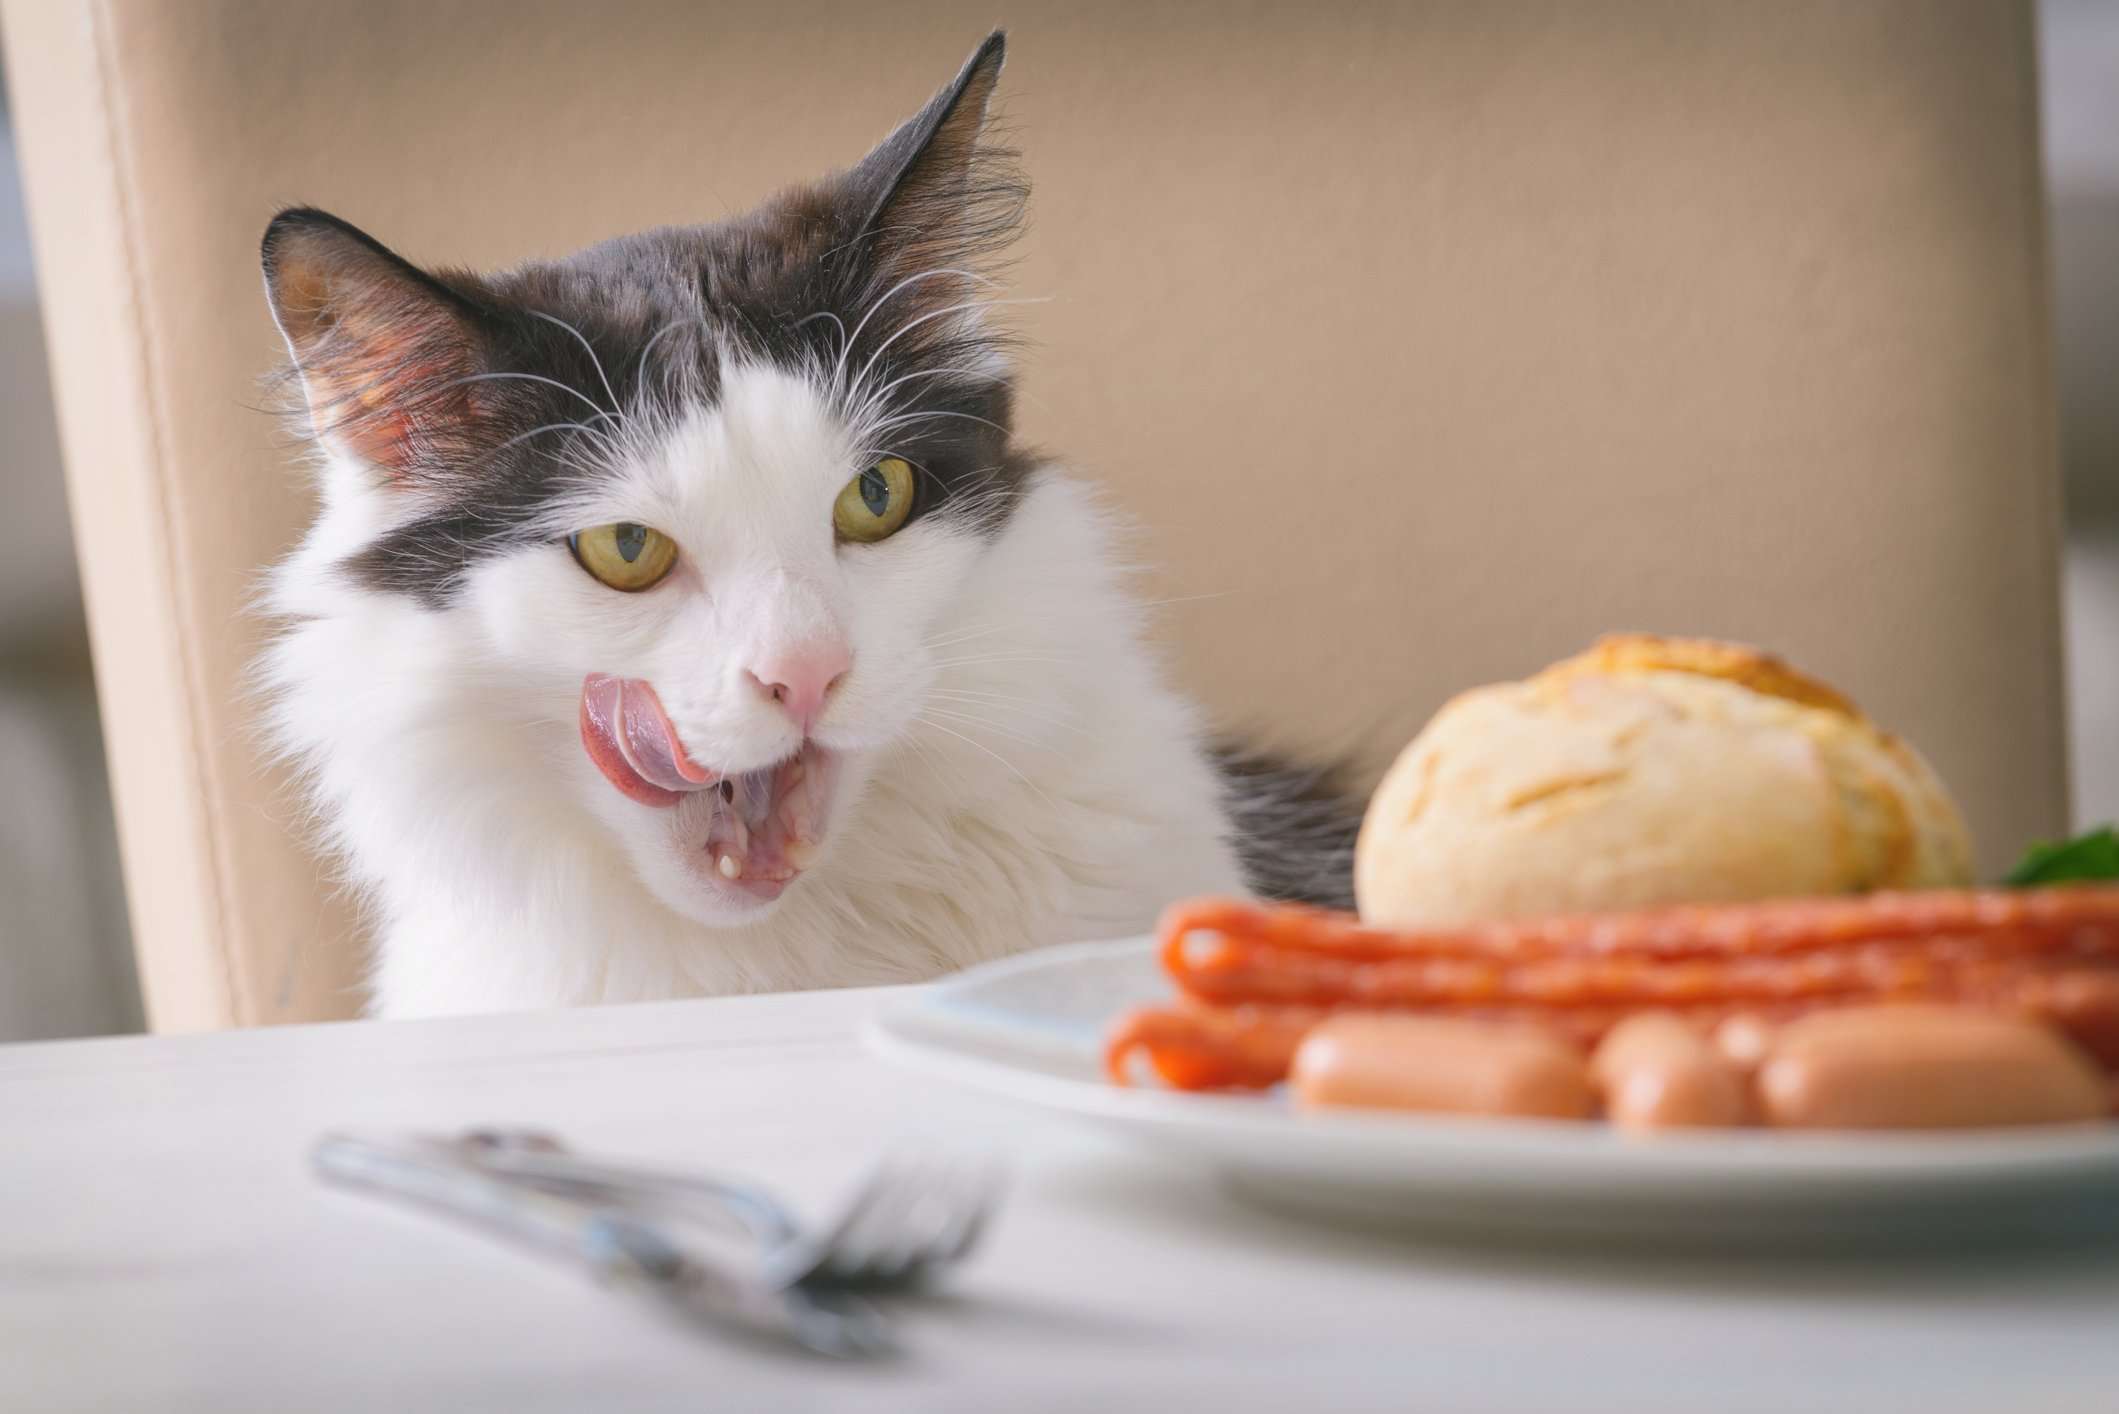 Purina launches cookbook for humans inspired by cats